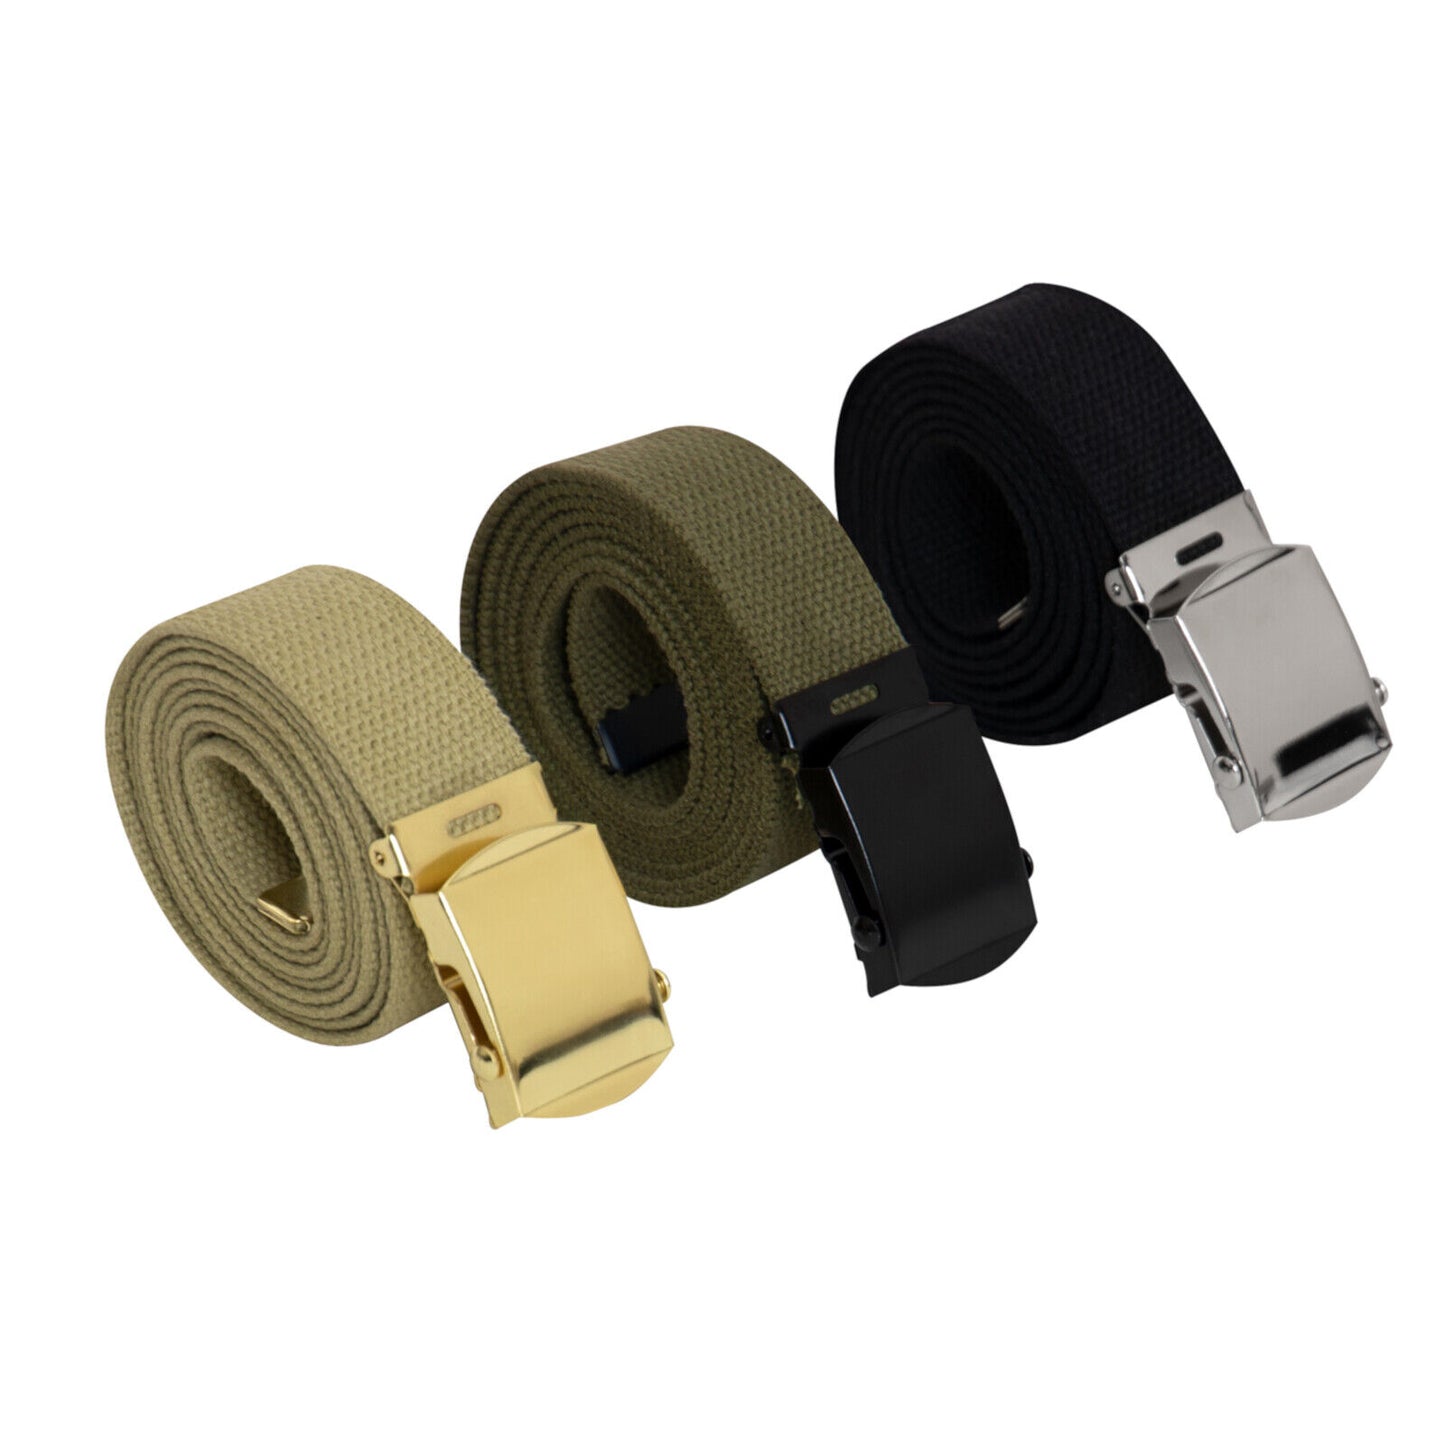 Rothco 3 Pack of 54 Inch Web Belts